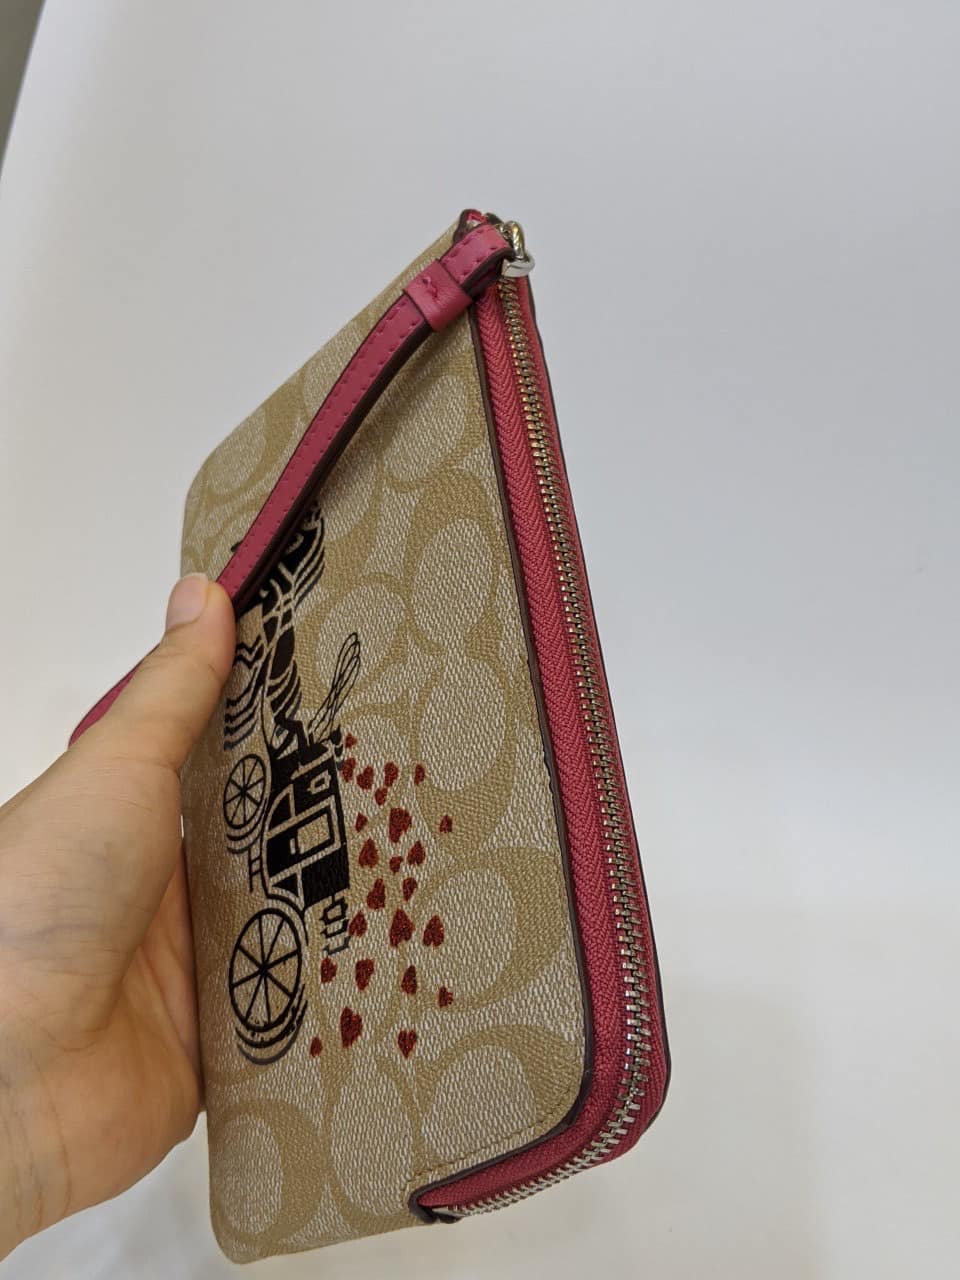 VÍ COACH MỎNG HỌA TIẾT XE NGỰA | CLUTCH COACH CORNER ZIP WRISTLET IN SIGNATURE CANVAS WITH HORSE AND CARRIAGE HEARTS 13